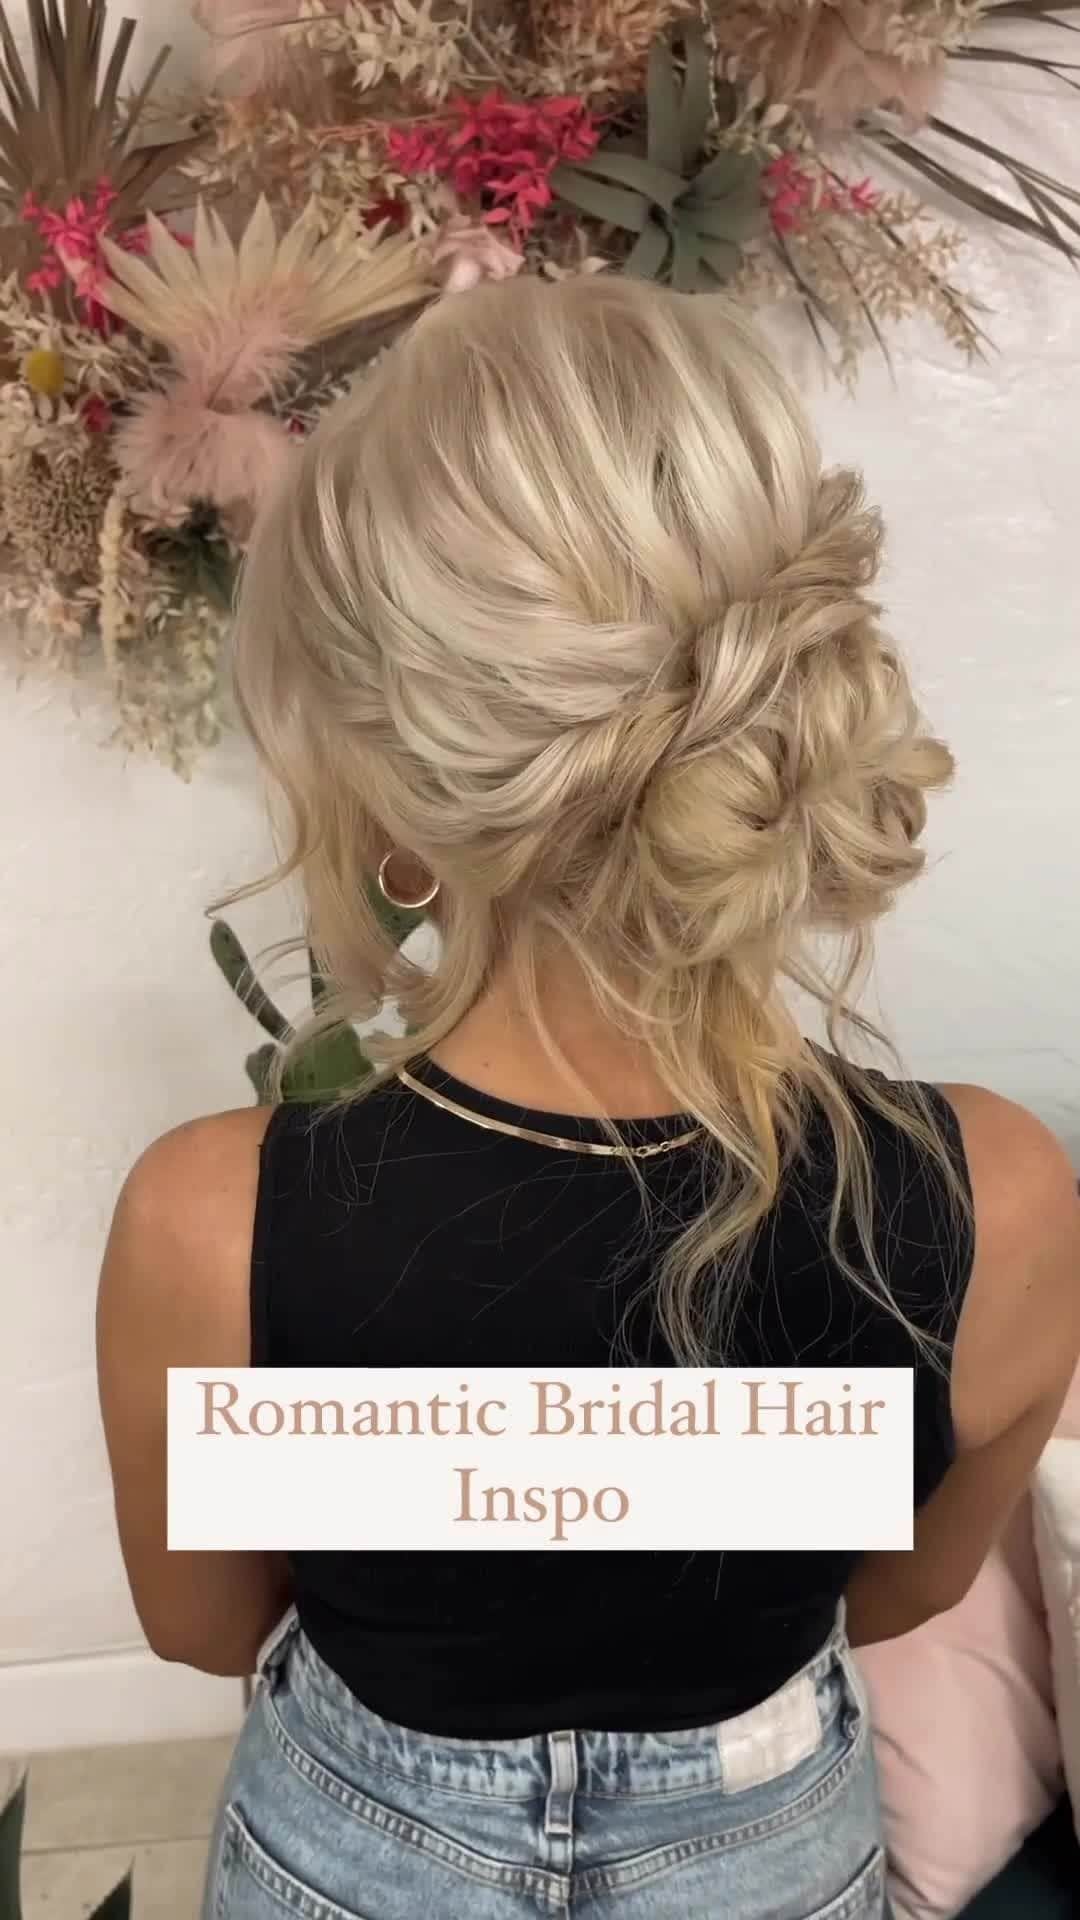 Sam Villaのインスタグラム：「From timeless updos to soft, cascading waves, the journey to your special day is about more than just a dress – it's all about the perfect hairstyle that complements your love story. Stylist @svglamour absolutely nails this romantic upstyle providing the perfect romantic bridal hair inspo. ⁠ ⁠ Before the big day, sit down with your salon guest to discuss their vision, their dress, and their dream look. It's in this precious moment that the magic begins. Get to know your salon guest, their style, and their expectations, allowing you to craft the perfect bridal hair plan.⁠ ⁠ #SamVilla⁠ #SamVillaCommunity⁠ .⁠ .⁠ .⁠ .⁠ .⁠ .⁠ #hairtutorial #hairvideo #hairstyling #hairgoals #calledtobecreative #bridal #bridetobe #bridalhair #weddinghair #beautyinspo #hairinspo #holidayparty #holidaypartyhair #hairstylingvideo」